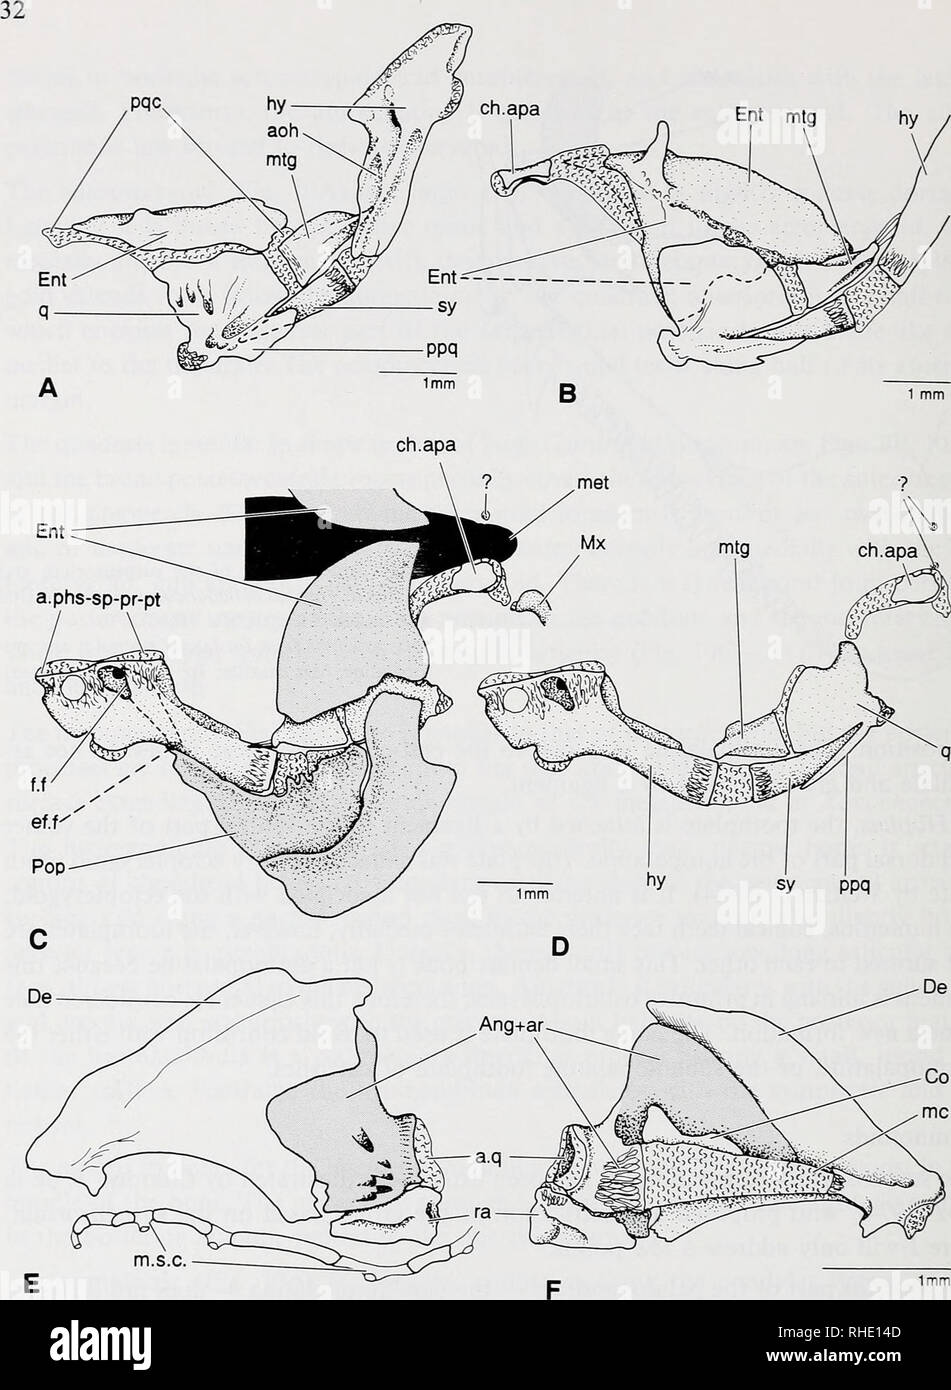 . Bonner zoologische Monographien. Zoology. Fig.l2: Suspensorium and lower jaw of gymnotoids. — A: Gymnotus carapo, lateral view (80 mm specimen; KU 13793); B—F: Hypopomus brevirostris (72 mm specimen; KU 13800); B: Suspensorium, lateral view; C: Suspensorium and related bones, medial view; D: Chondral elements of the Suspensorium, medial view; E: Lower jaw, lateral view; F: Lower jaw, medial view. C—F same scales. Ang + ar: angulo-articular; aoh: membranous outgrowth; apa: chondral autopalatine; a. phs-sp-pr-pt: articular facet for pterosphenoid, sphenotic, prootic, and pterotic; a.q: articul Stock Photo